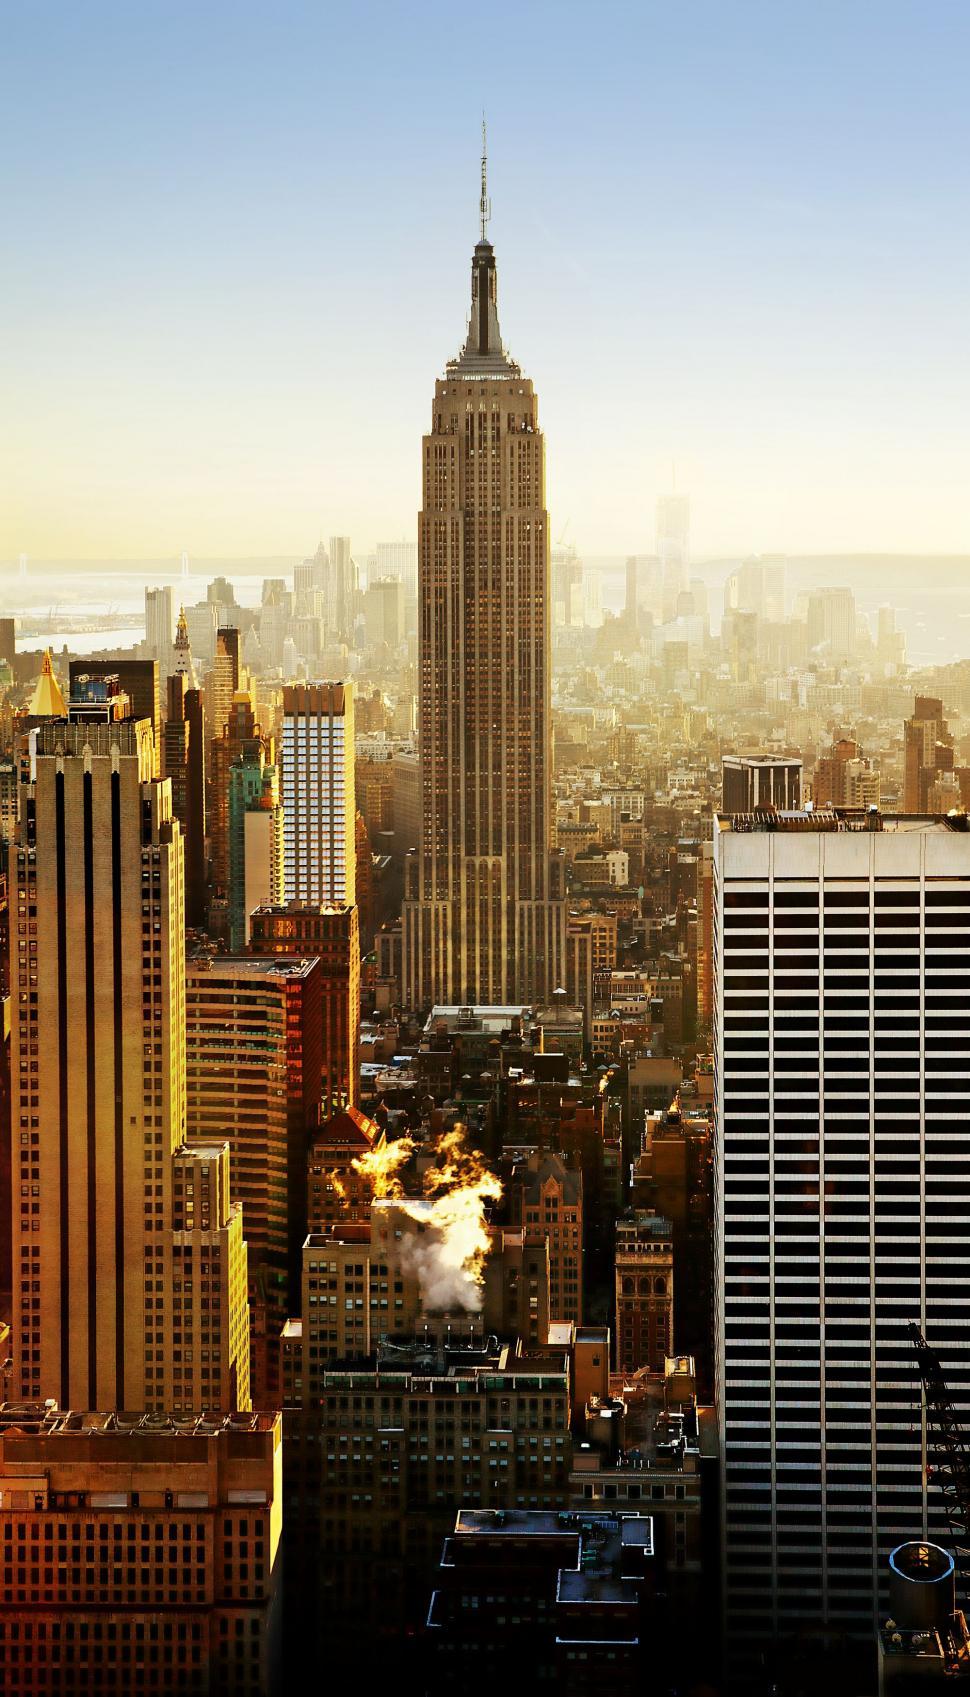 Free Image of Urban Landscape With Tall Buildings 